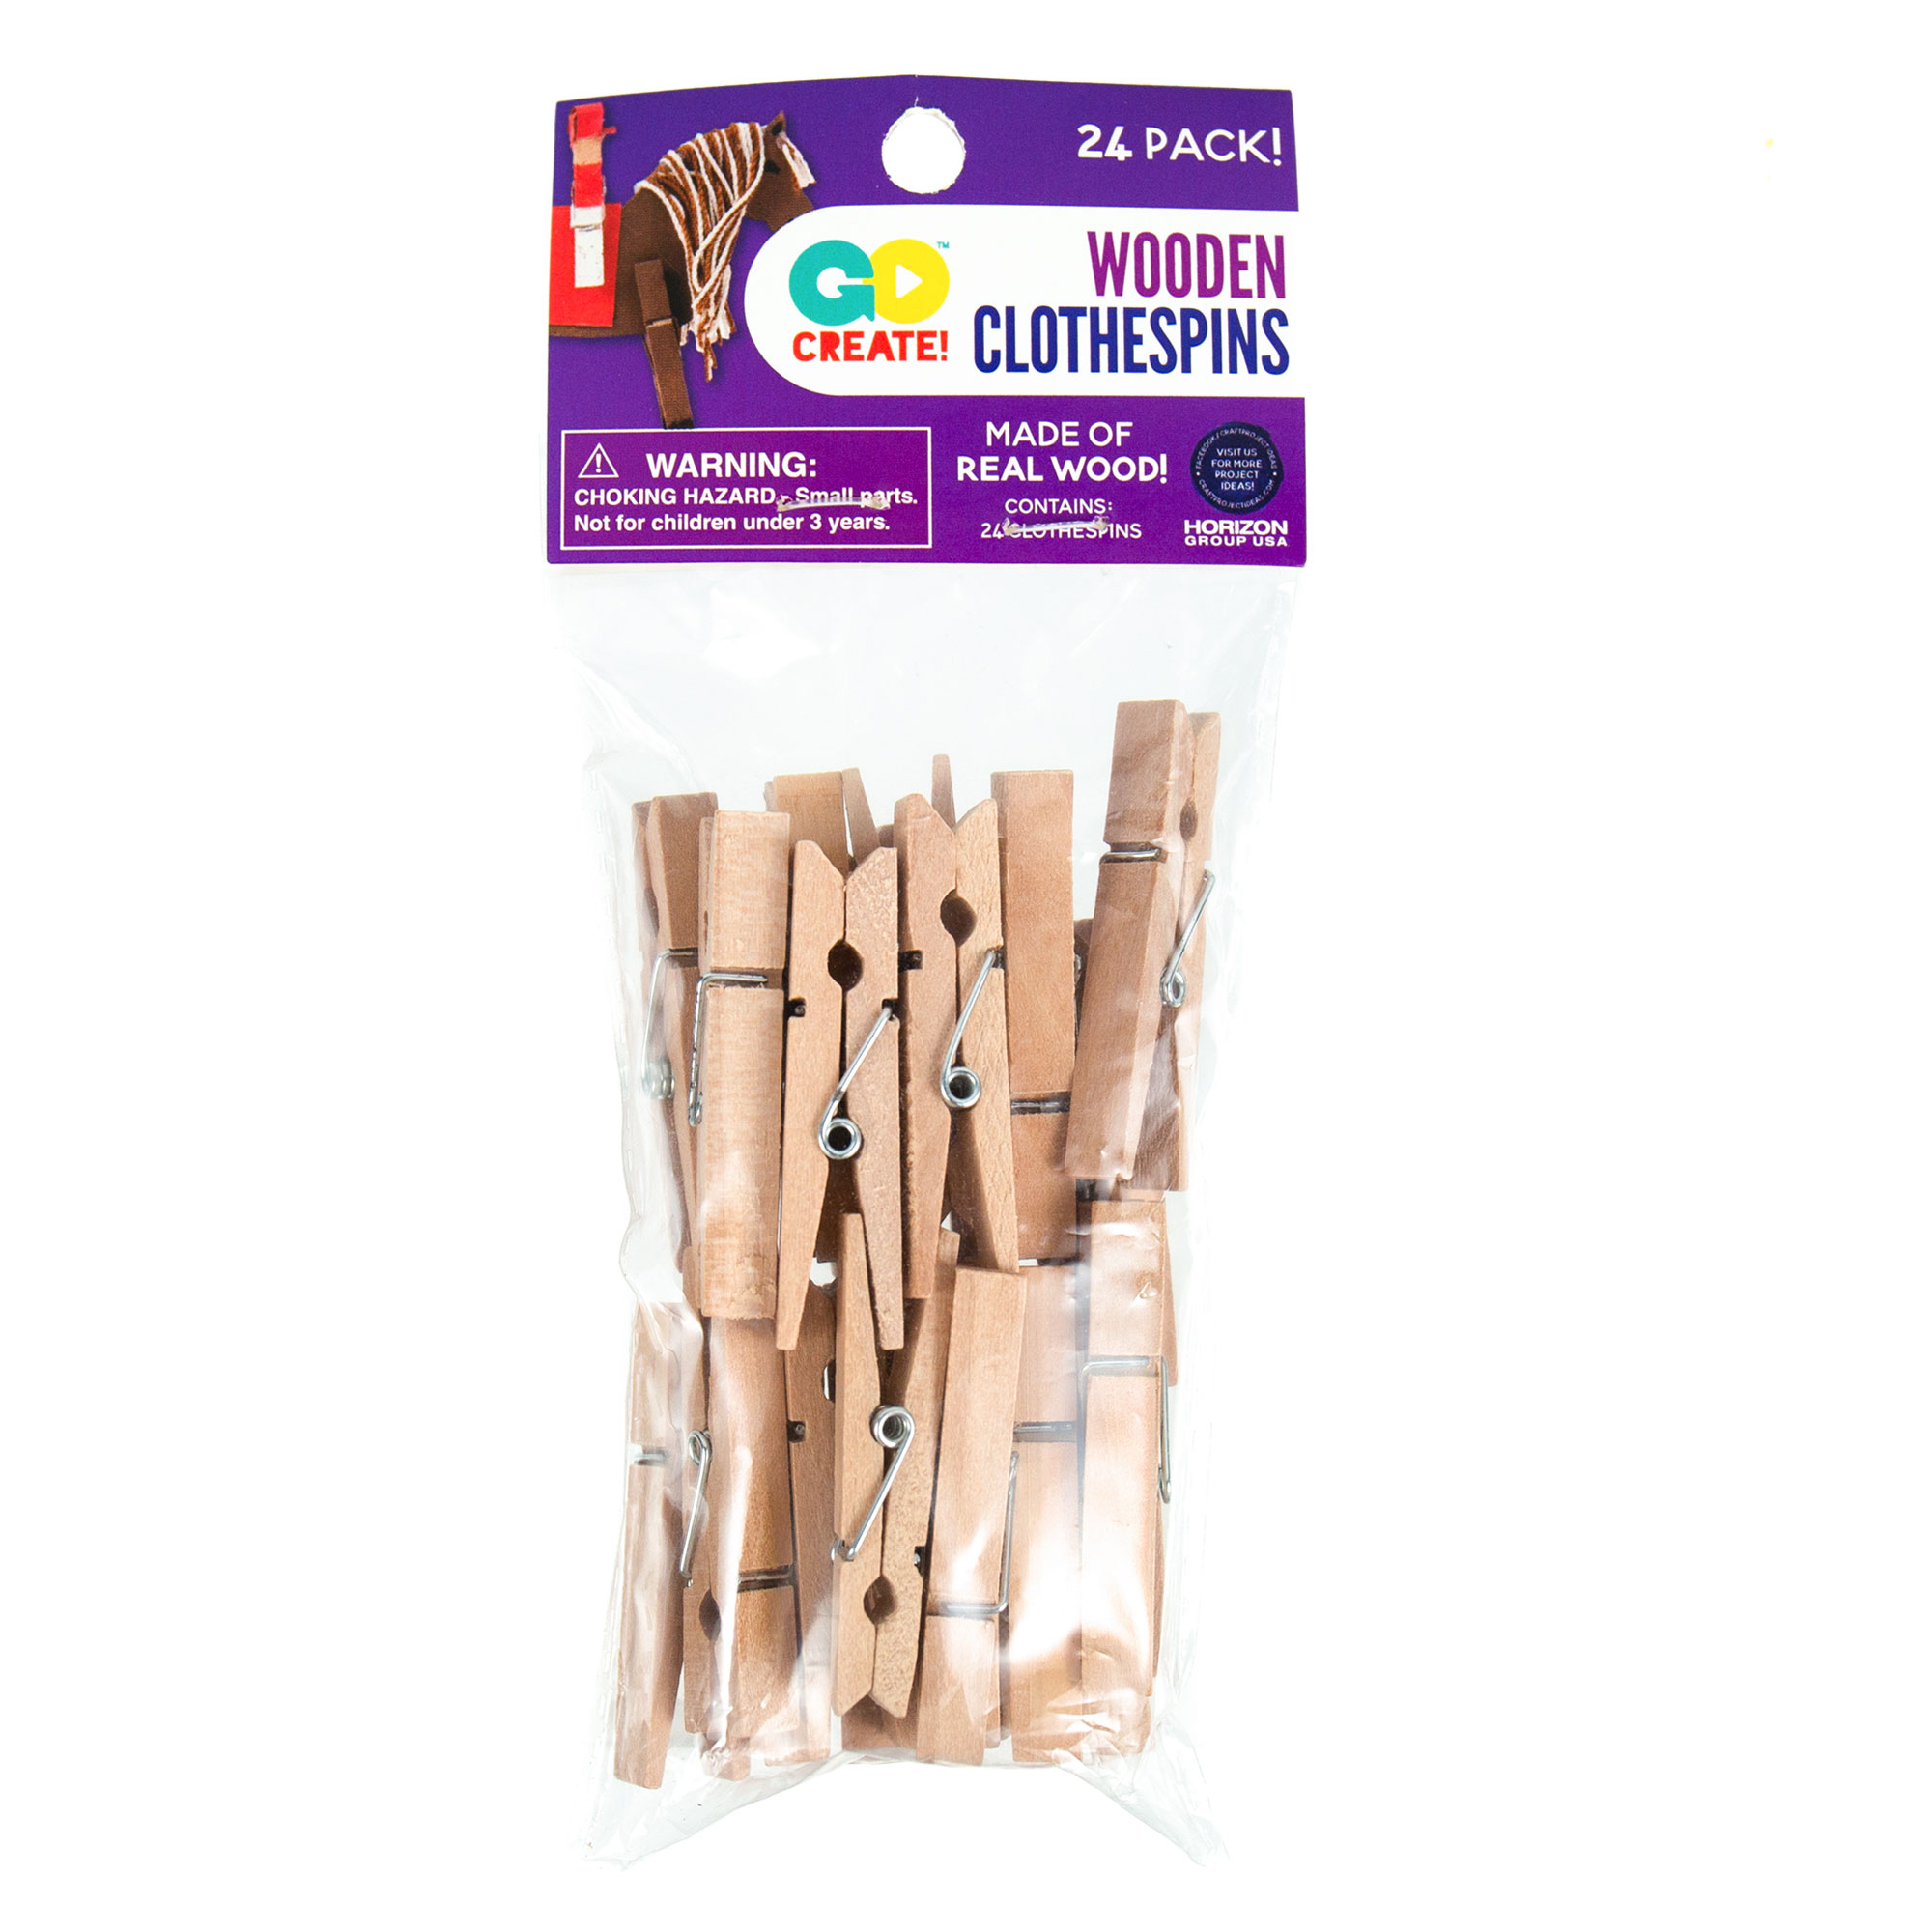 Go Create Small Wooden Clothespins, 24-Pack Small Wood Clothespins - image 1 of 4